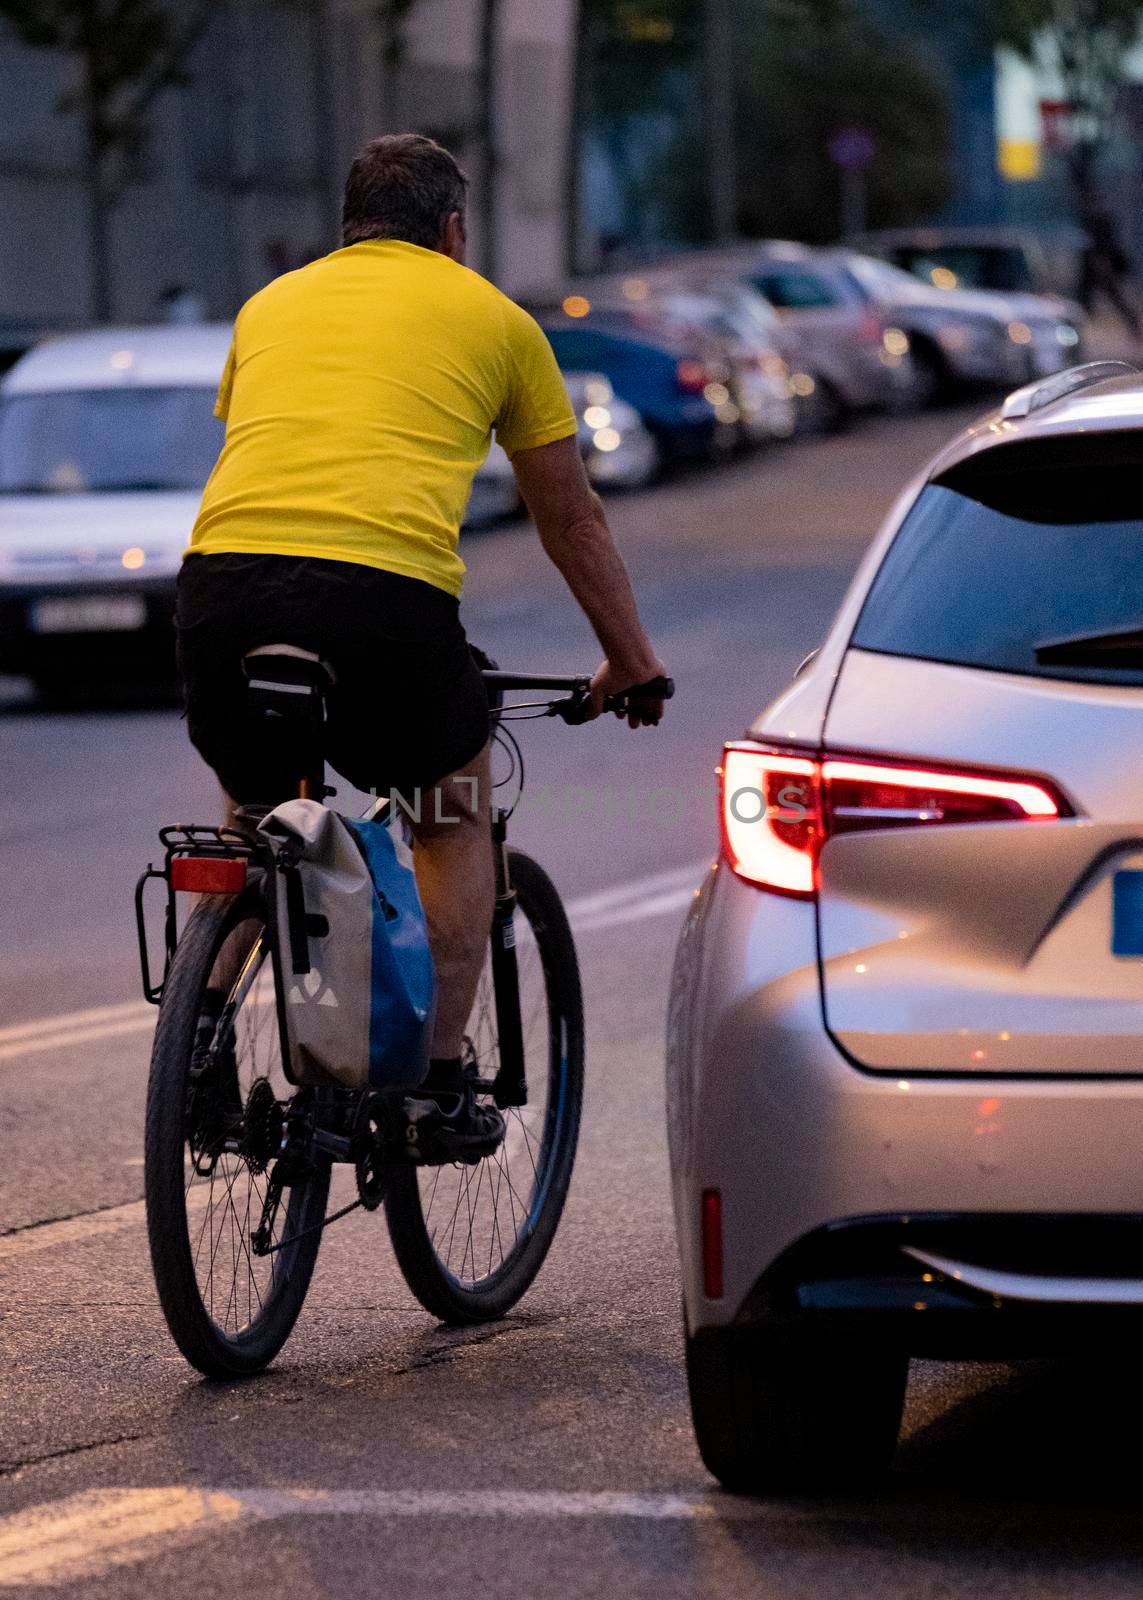 Cyclist overtaking car in a a road with low light. Rider in a risky or danger situation. rear view